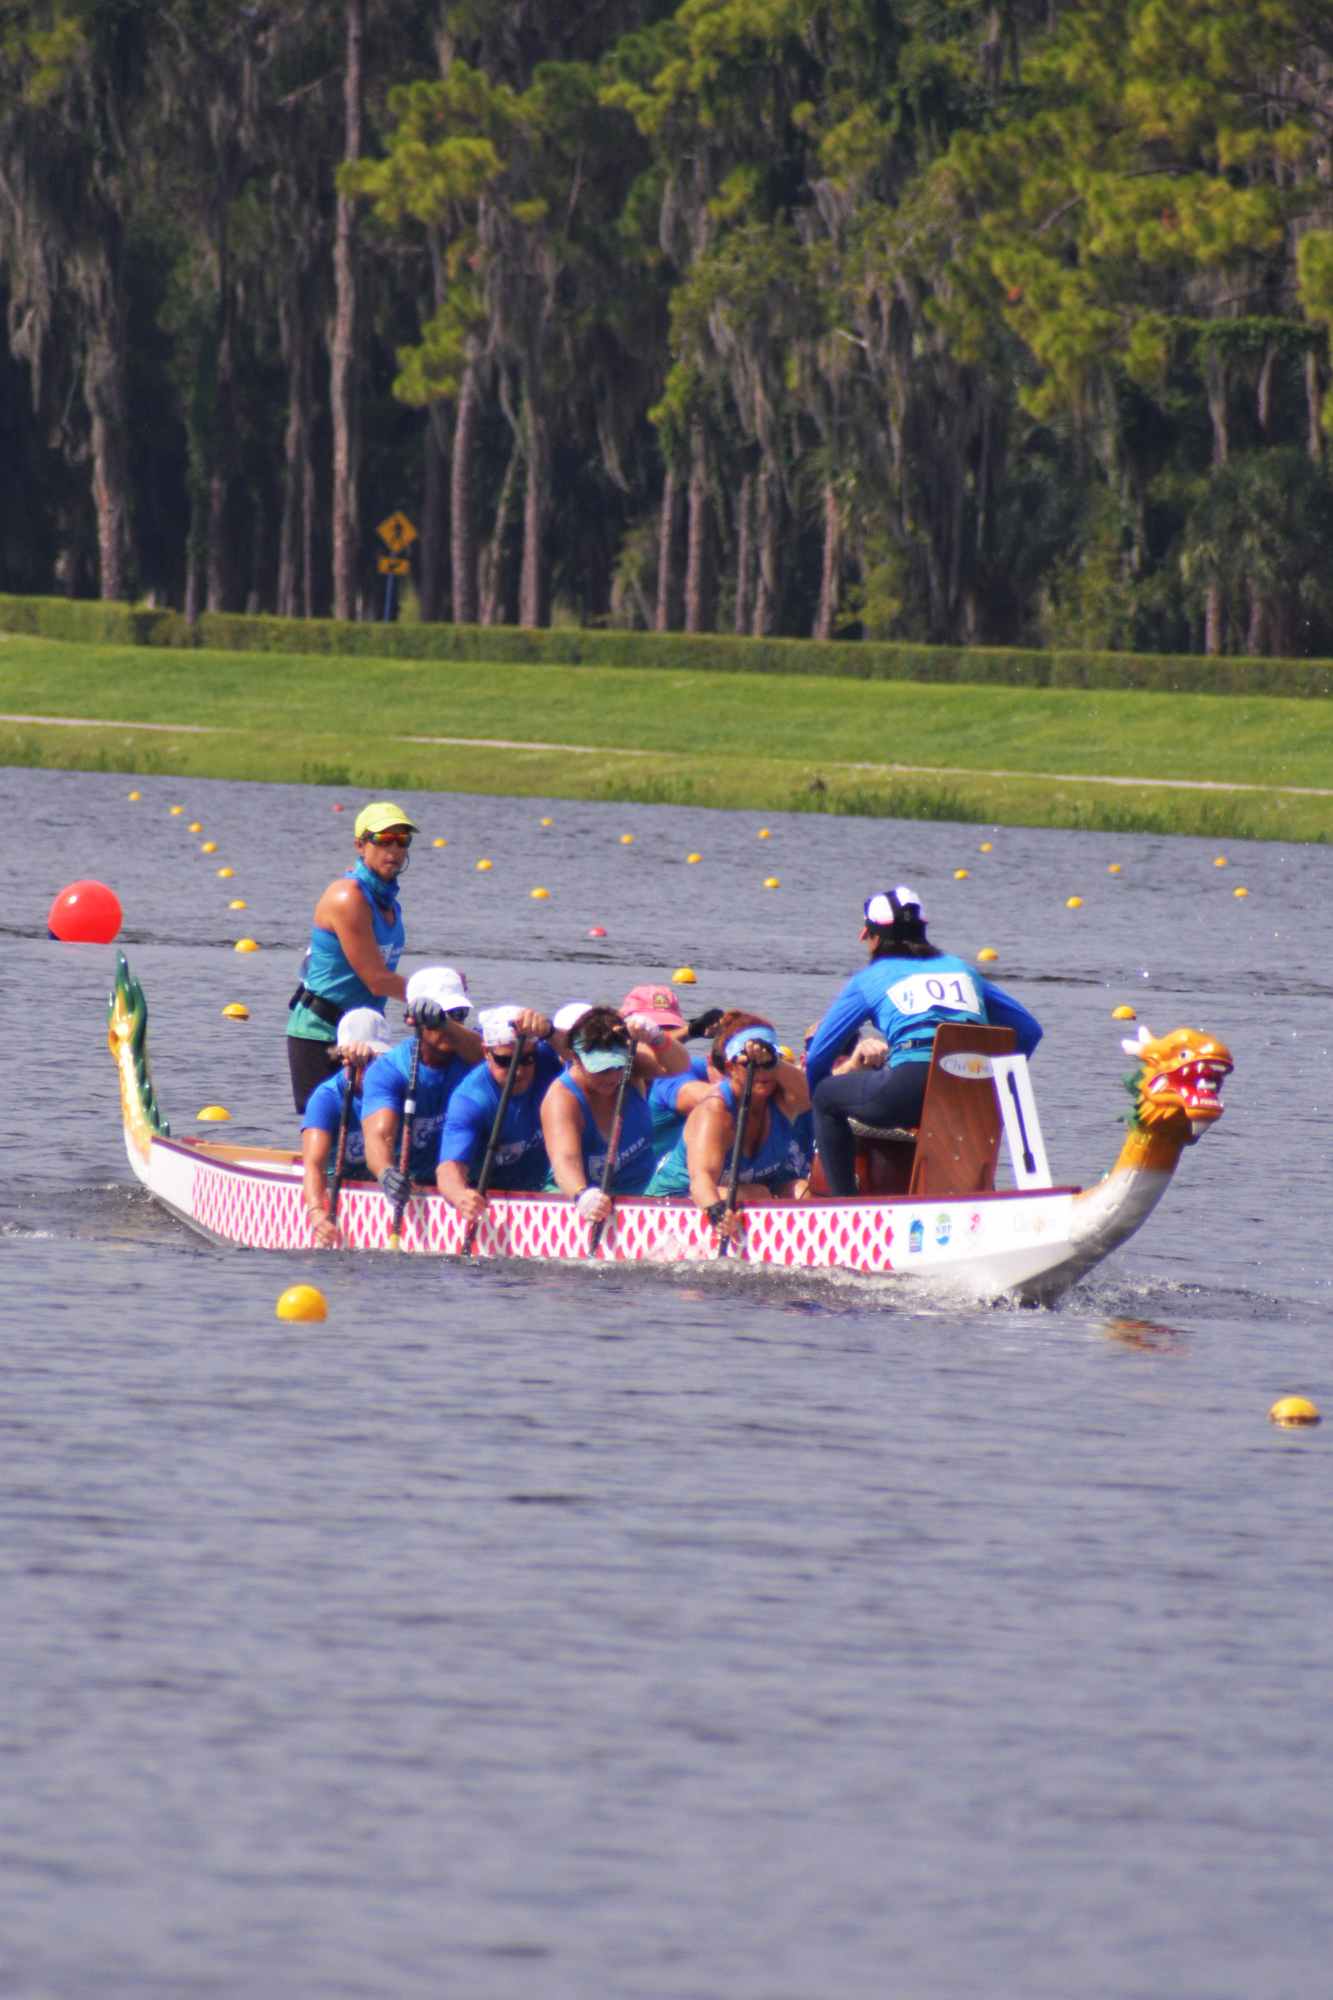 The NBP Dragons Senior B Mixed Small Boat paddles in its 2000 meter race during the 2022 IDBF Club Crew Championships. The boat finished second.